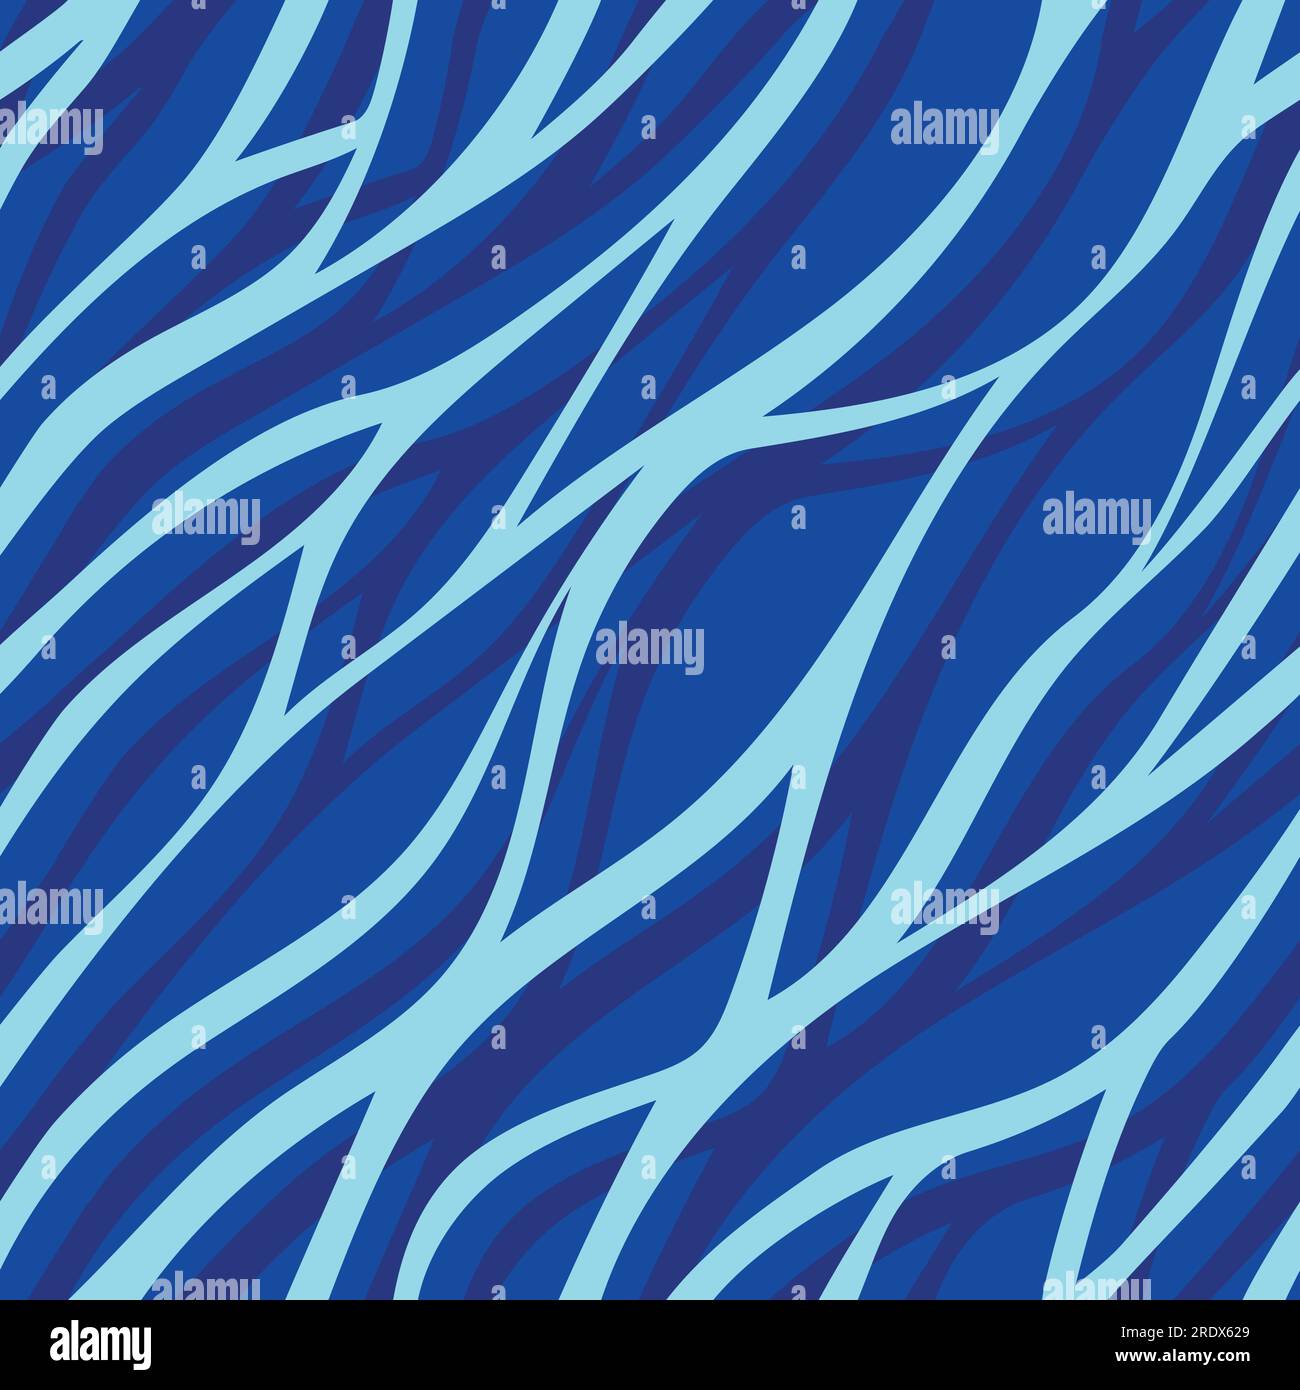 Seamless vector pattern, stylized blue water surface, curvy lines